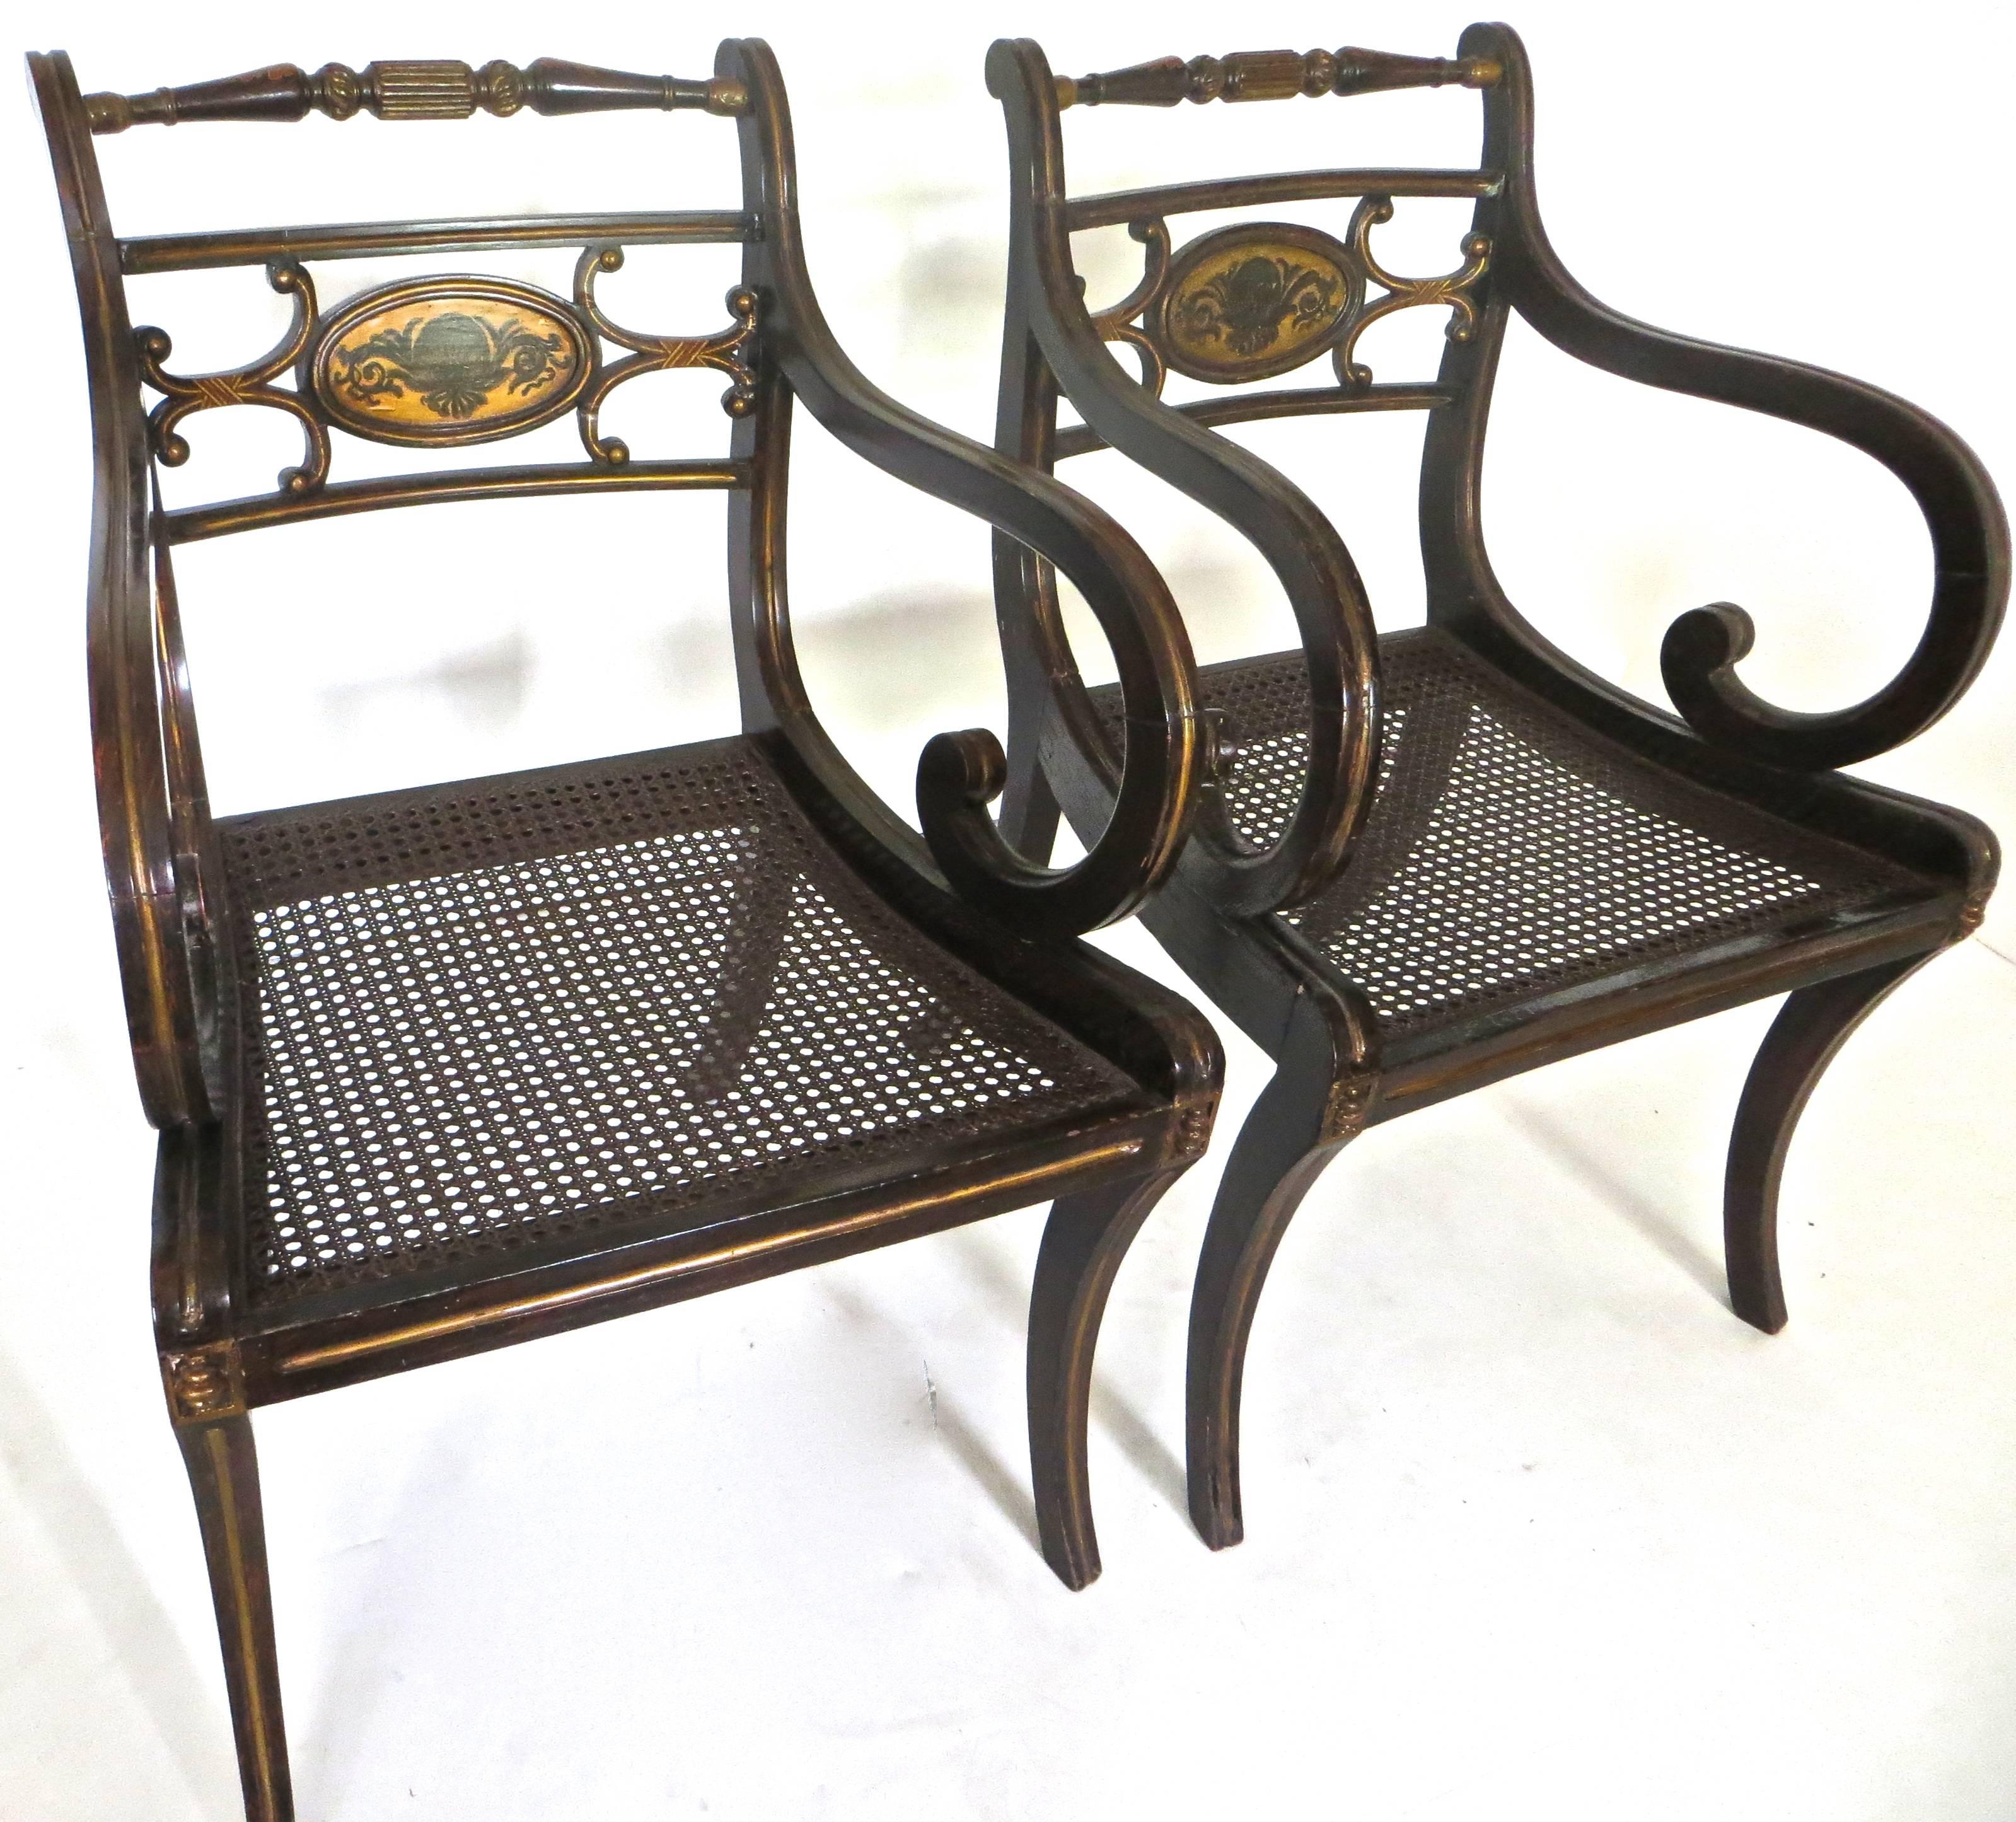 Hand-Painted Pair of Regency Faux Rosewood Japanned and Parcel Gilt Armchairs, circa 1810 For Sale